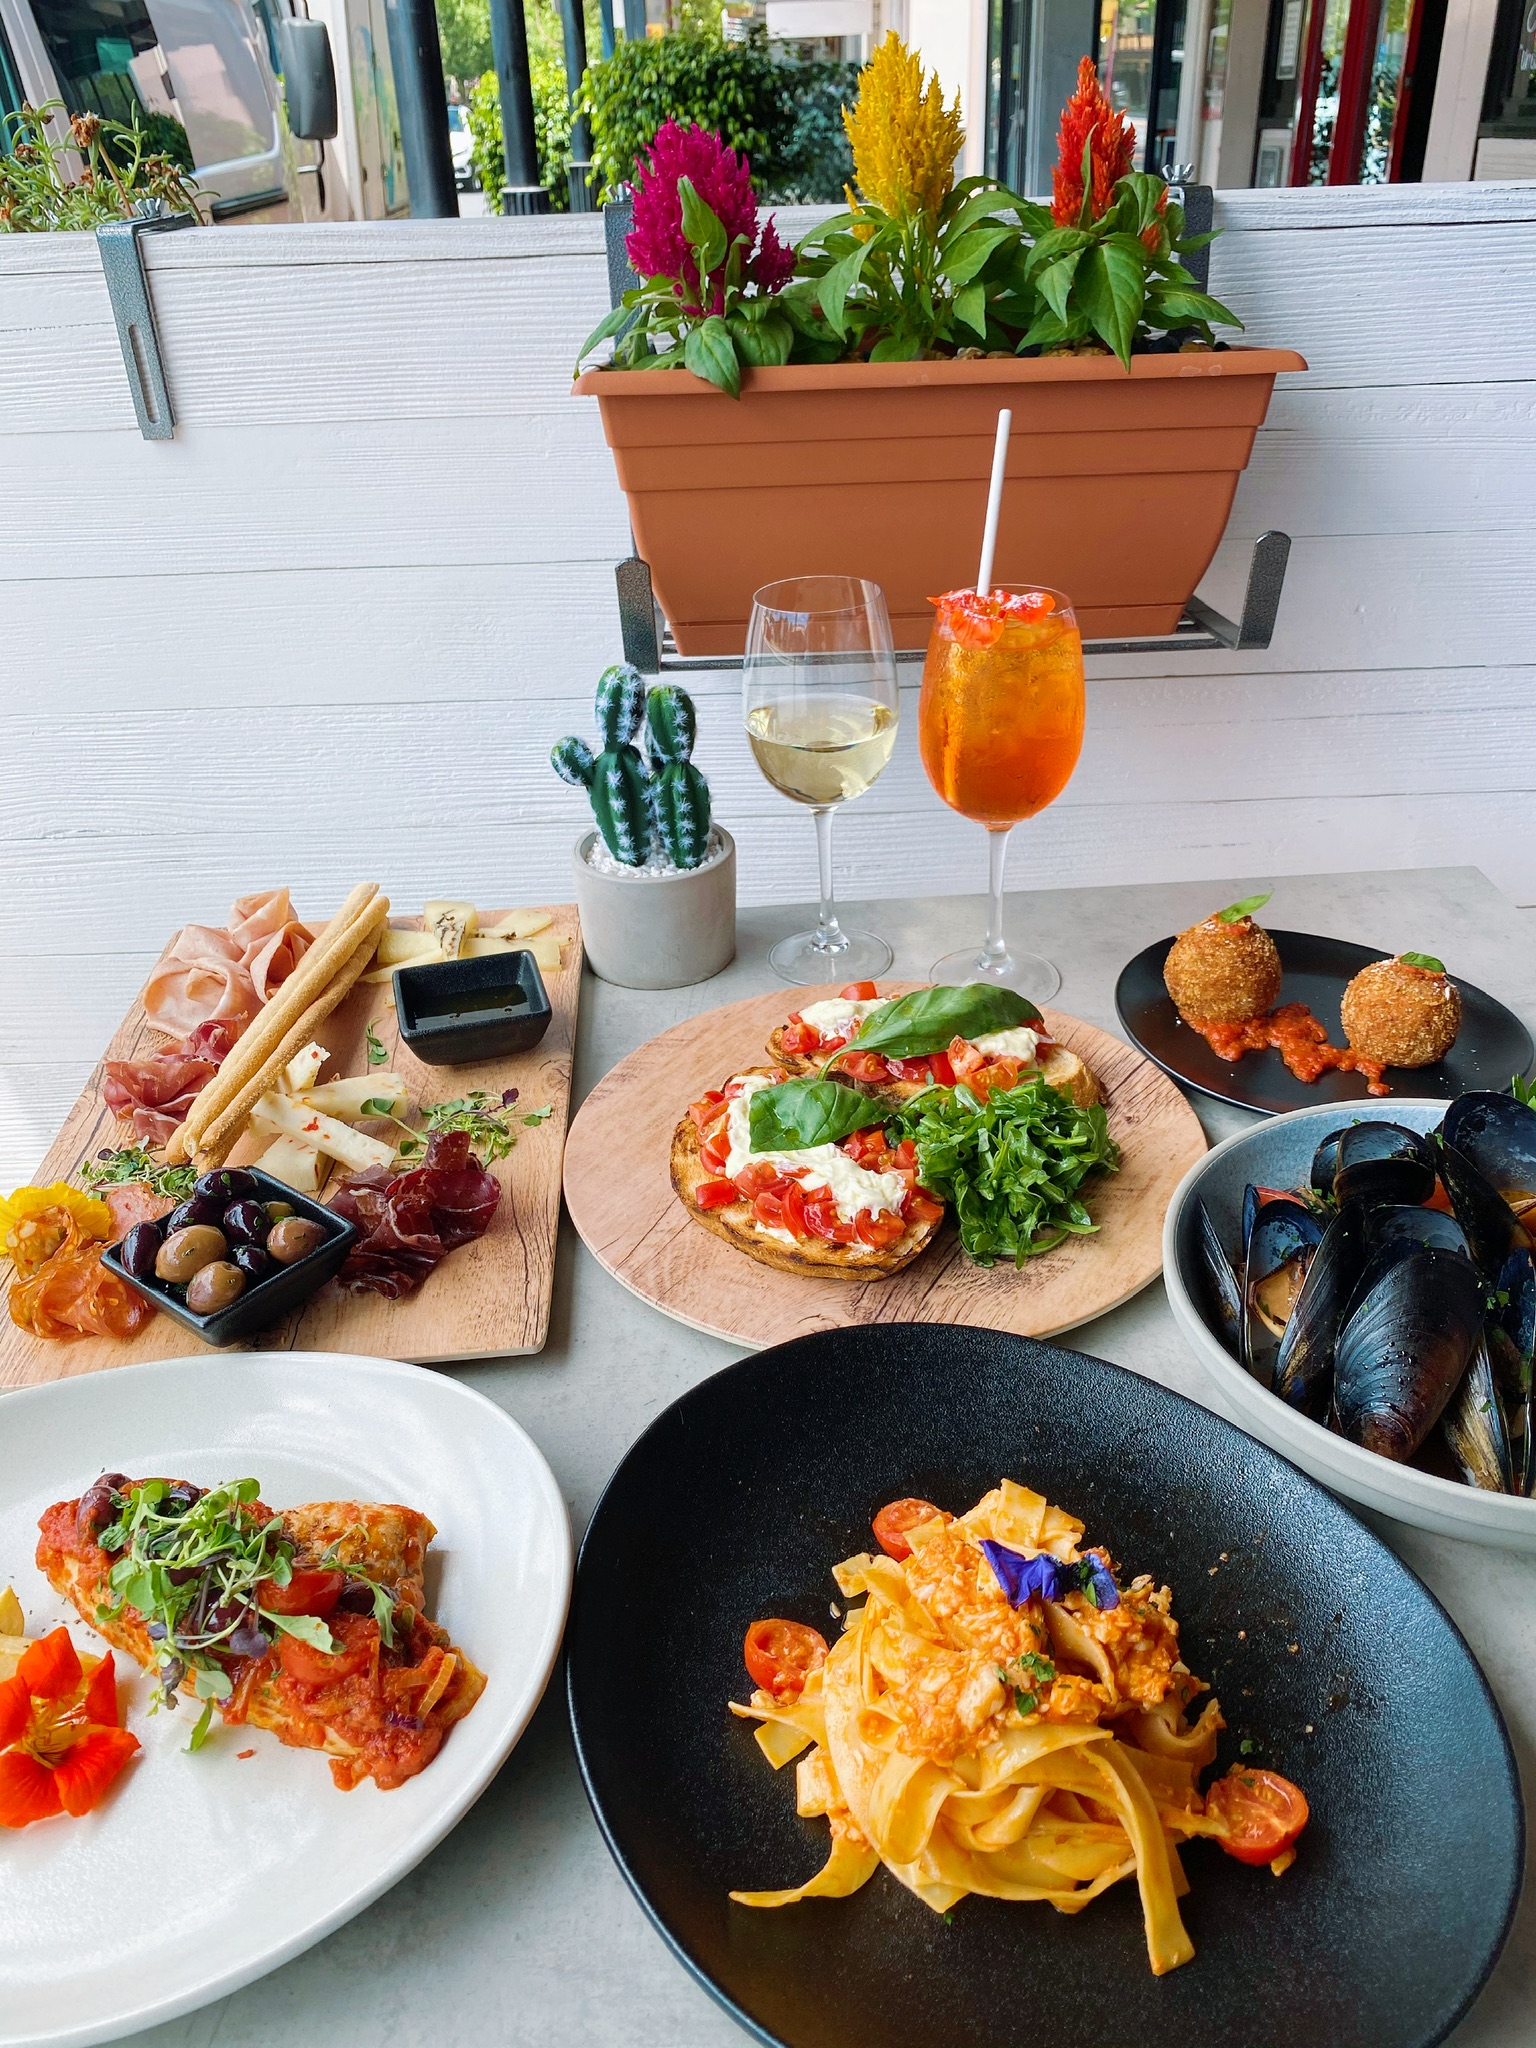 WIN an incredible Italian FEAST at Sapore Dolce